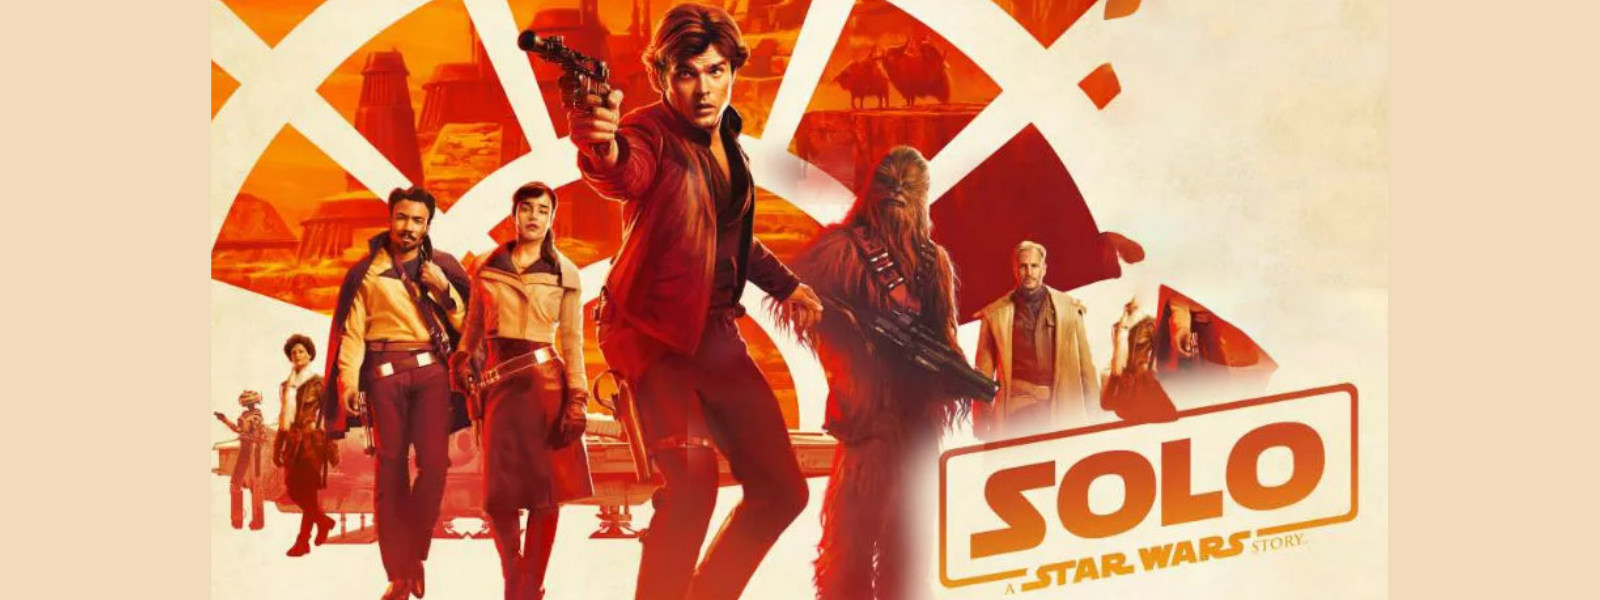 'Solo: A Star Wars Story' scores another win